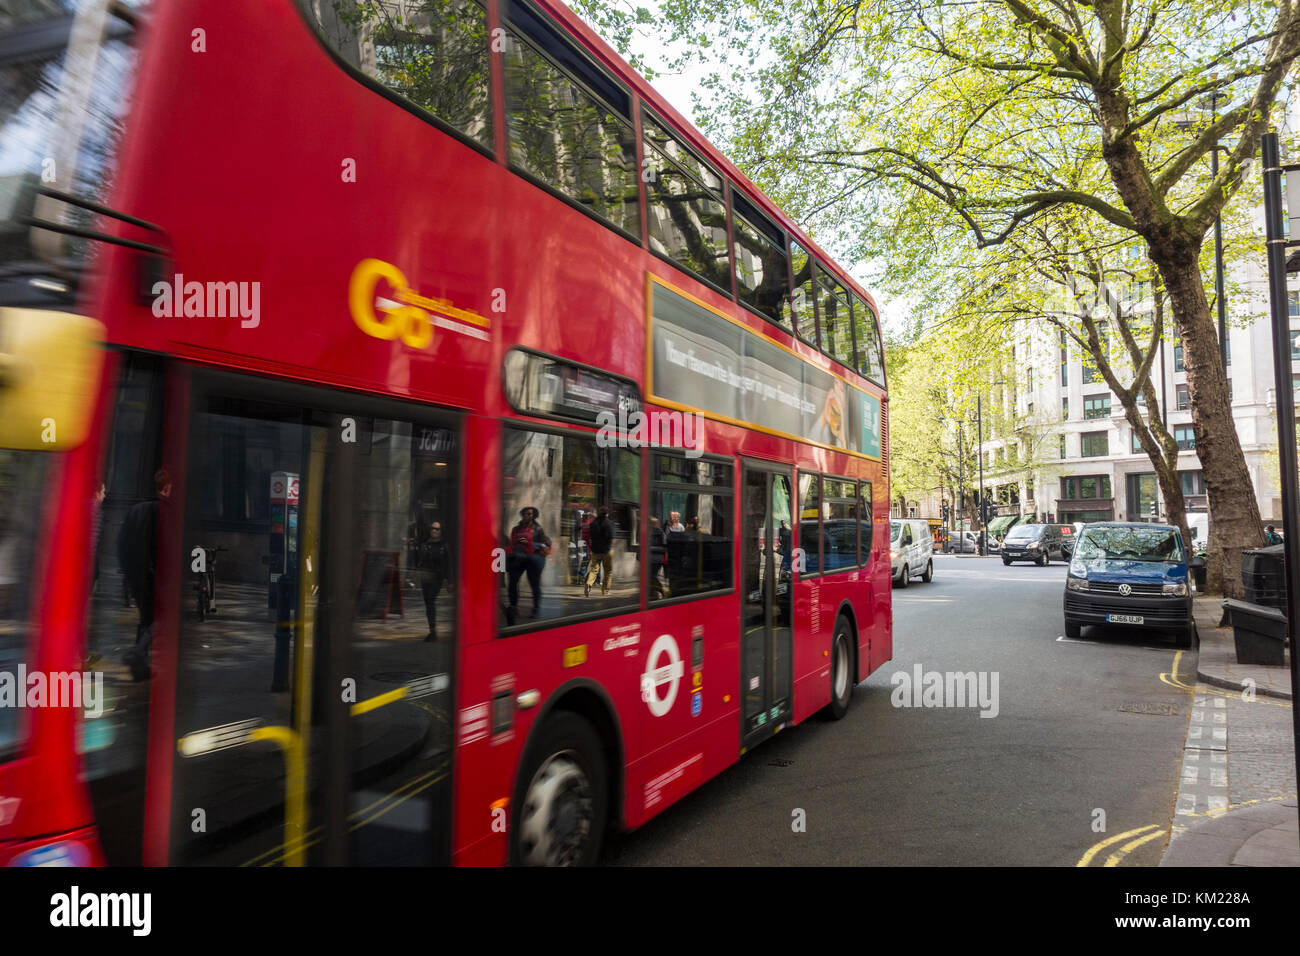 Reflections of people on the pavement in a red London bus, UK Stock Photo